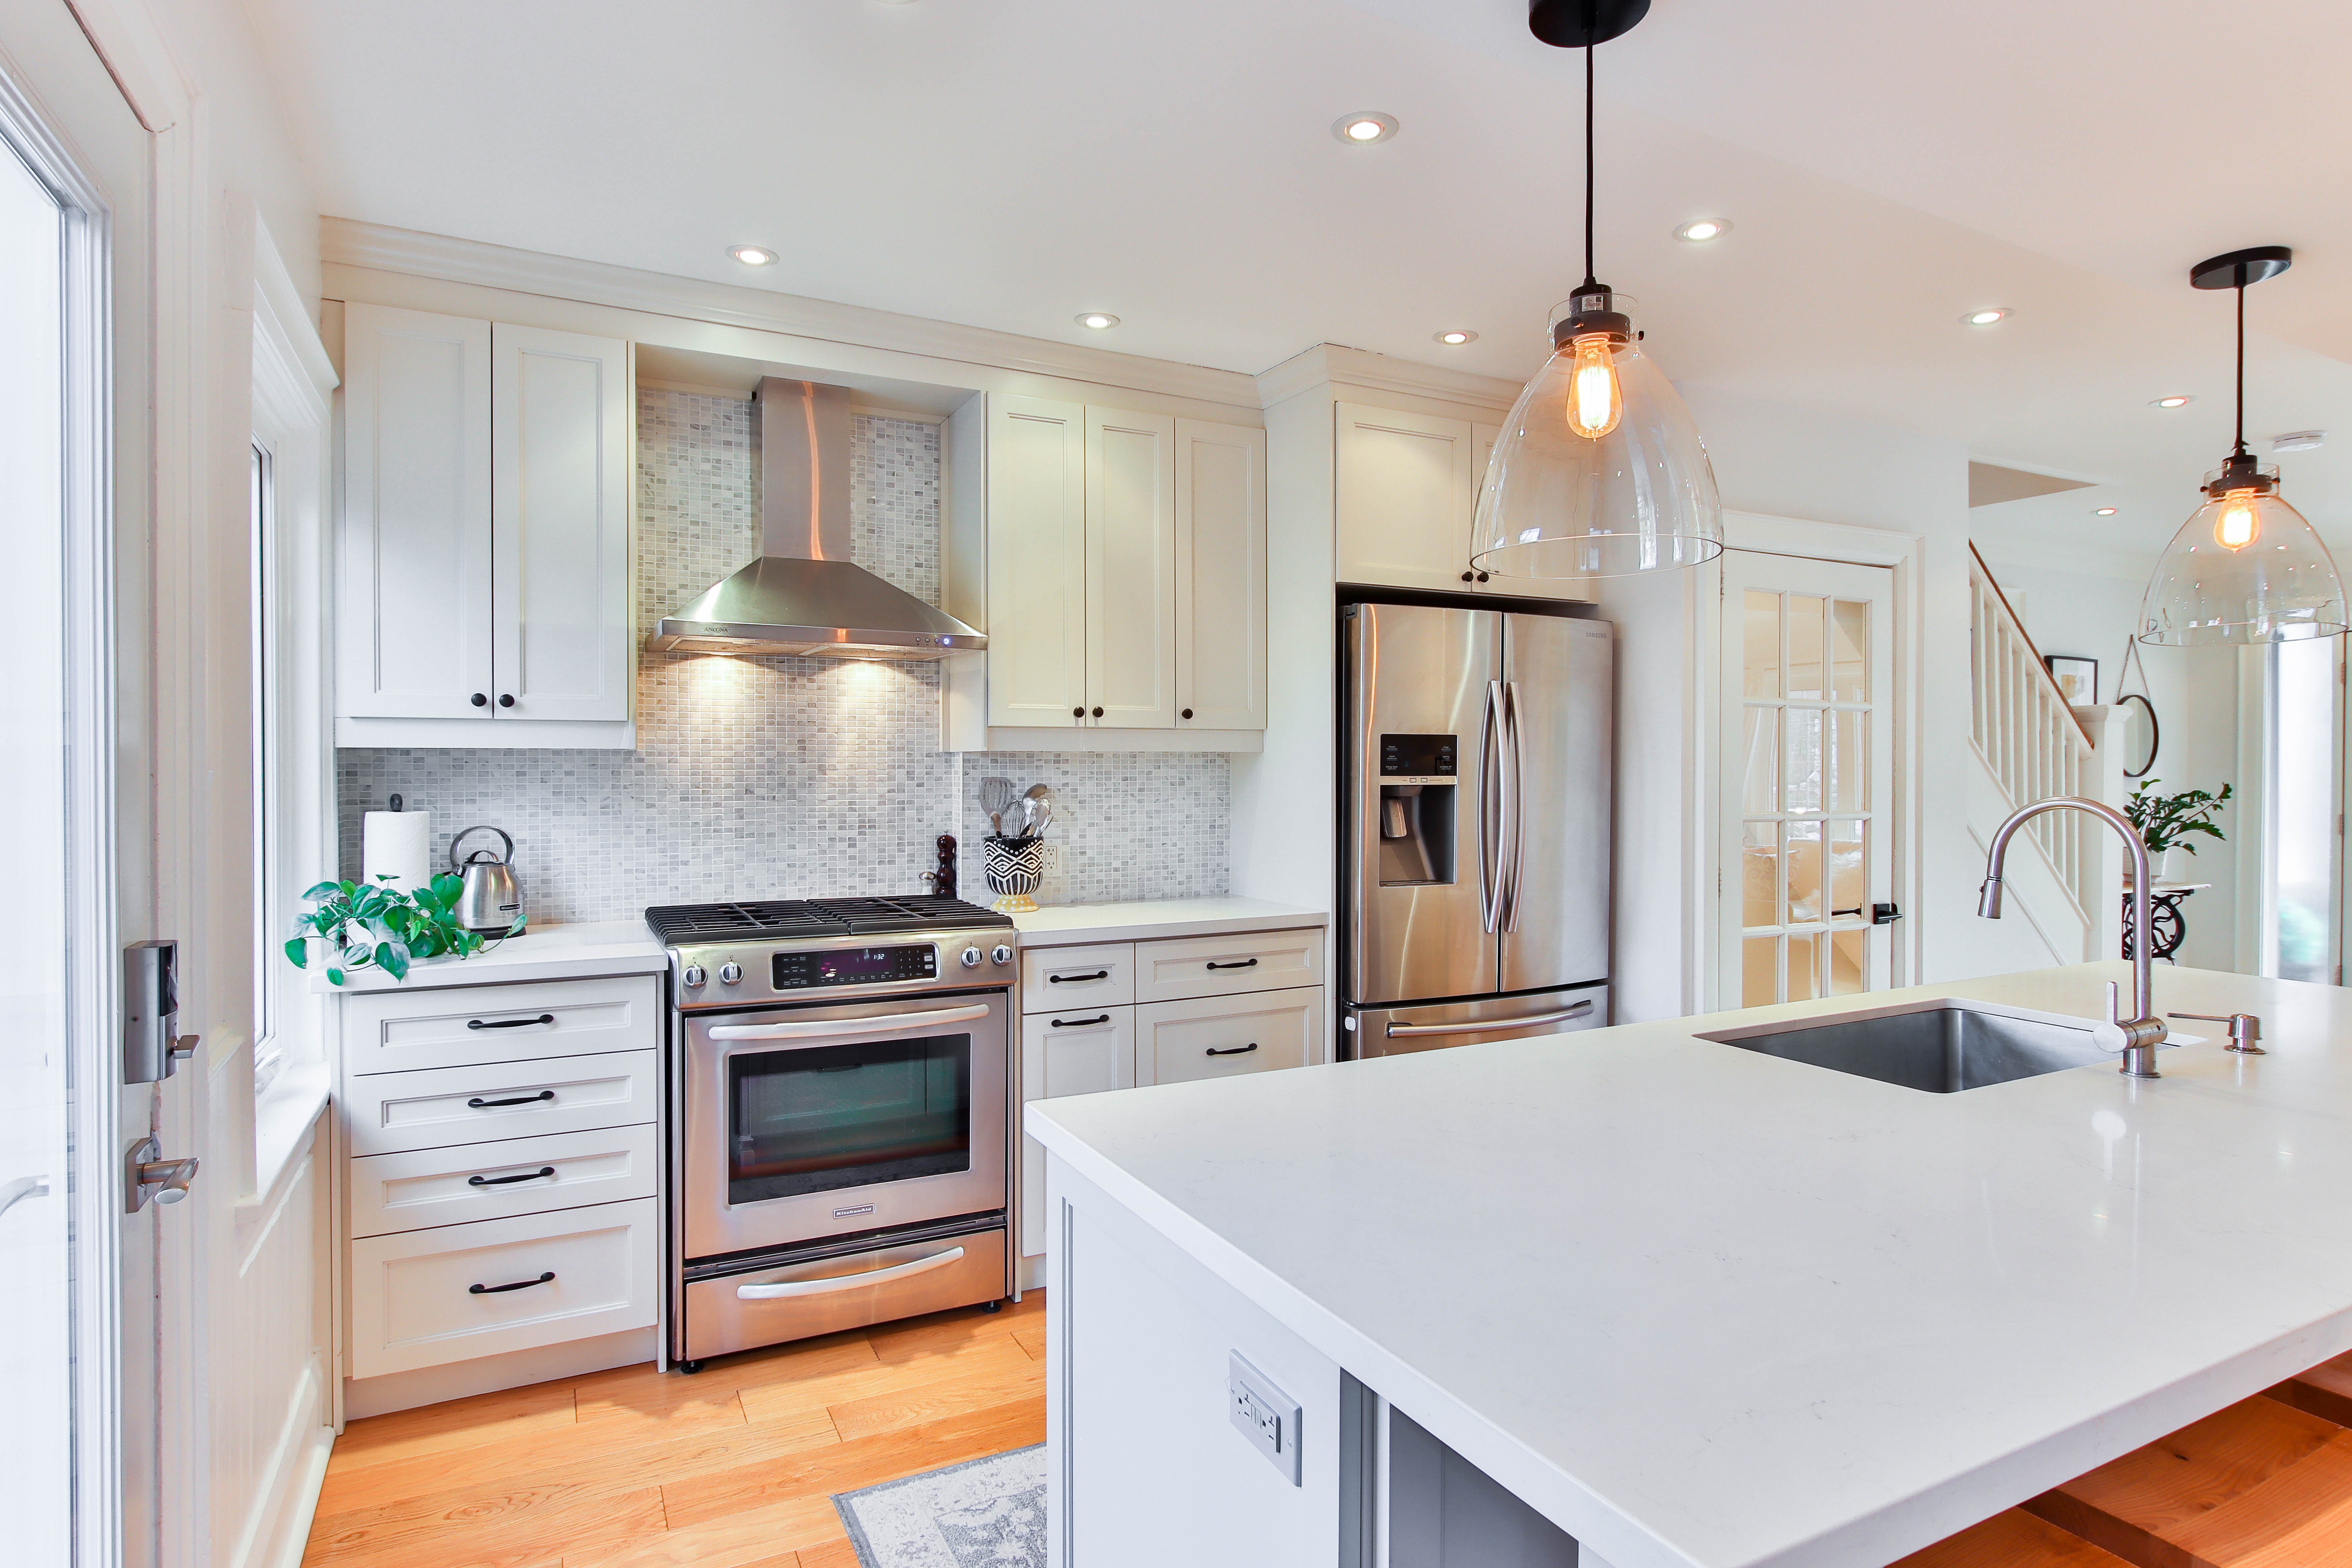 A renovated kitchen with new appliances, white countertops, and overhead lighting, similar to one renovated on HGTV by Cristy Lee.